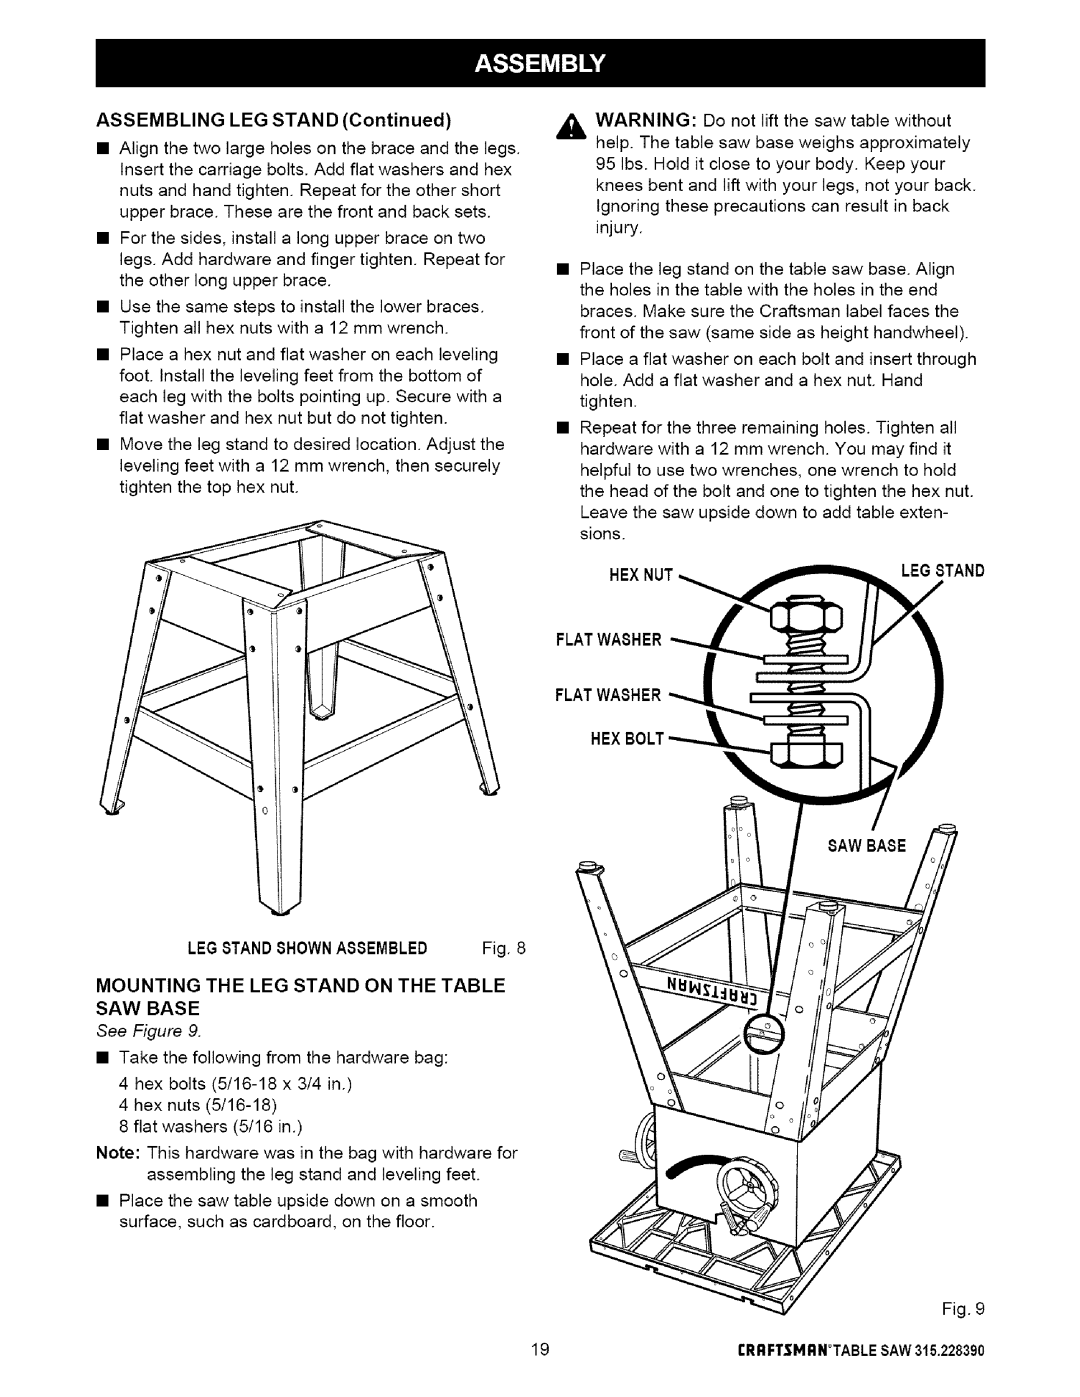 Craftsman 315.22839 owner manual ASSEMBLING LEG STAND Continued, Mounting The Leg Stand On The Table Saw Base 